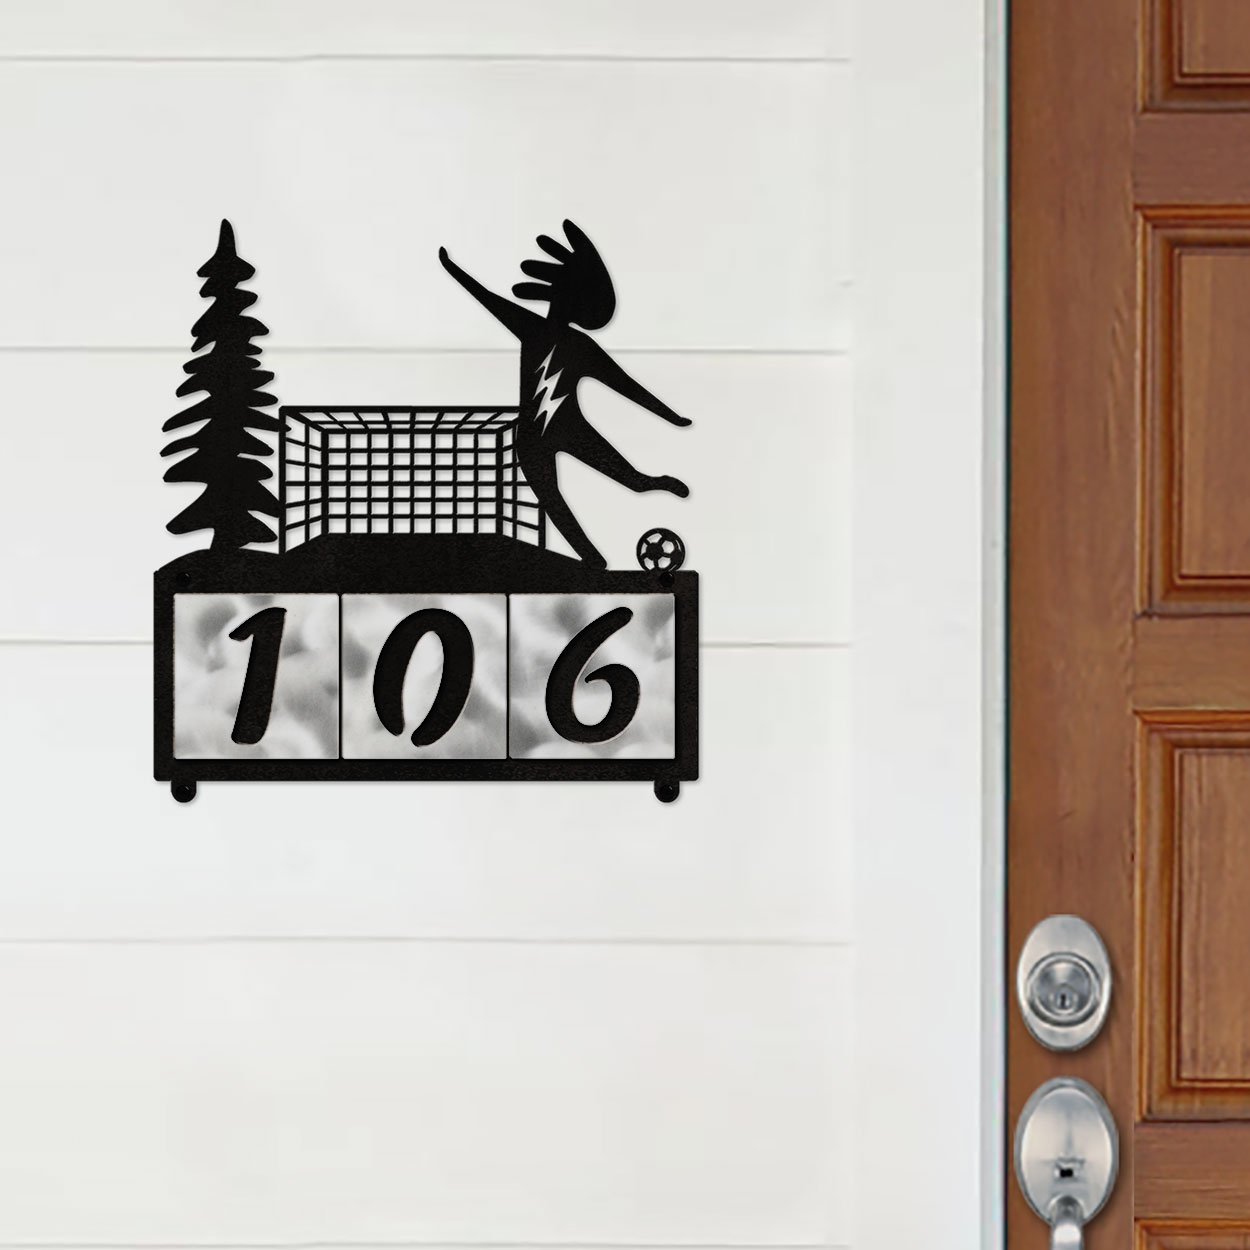 607183 - Kokopelli Lone Soccer Player Design 3-Digit Horizontal 4-inch Tile Outdoor House Numbers